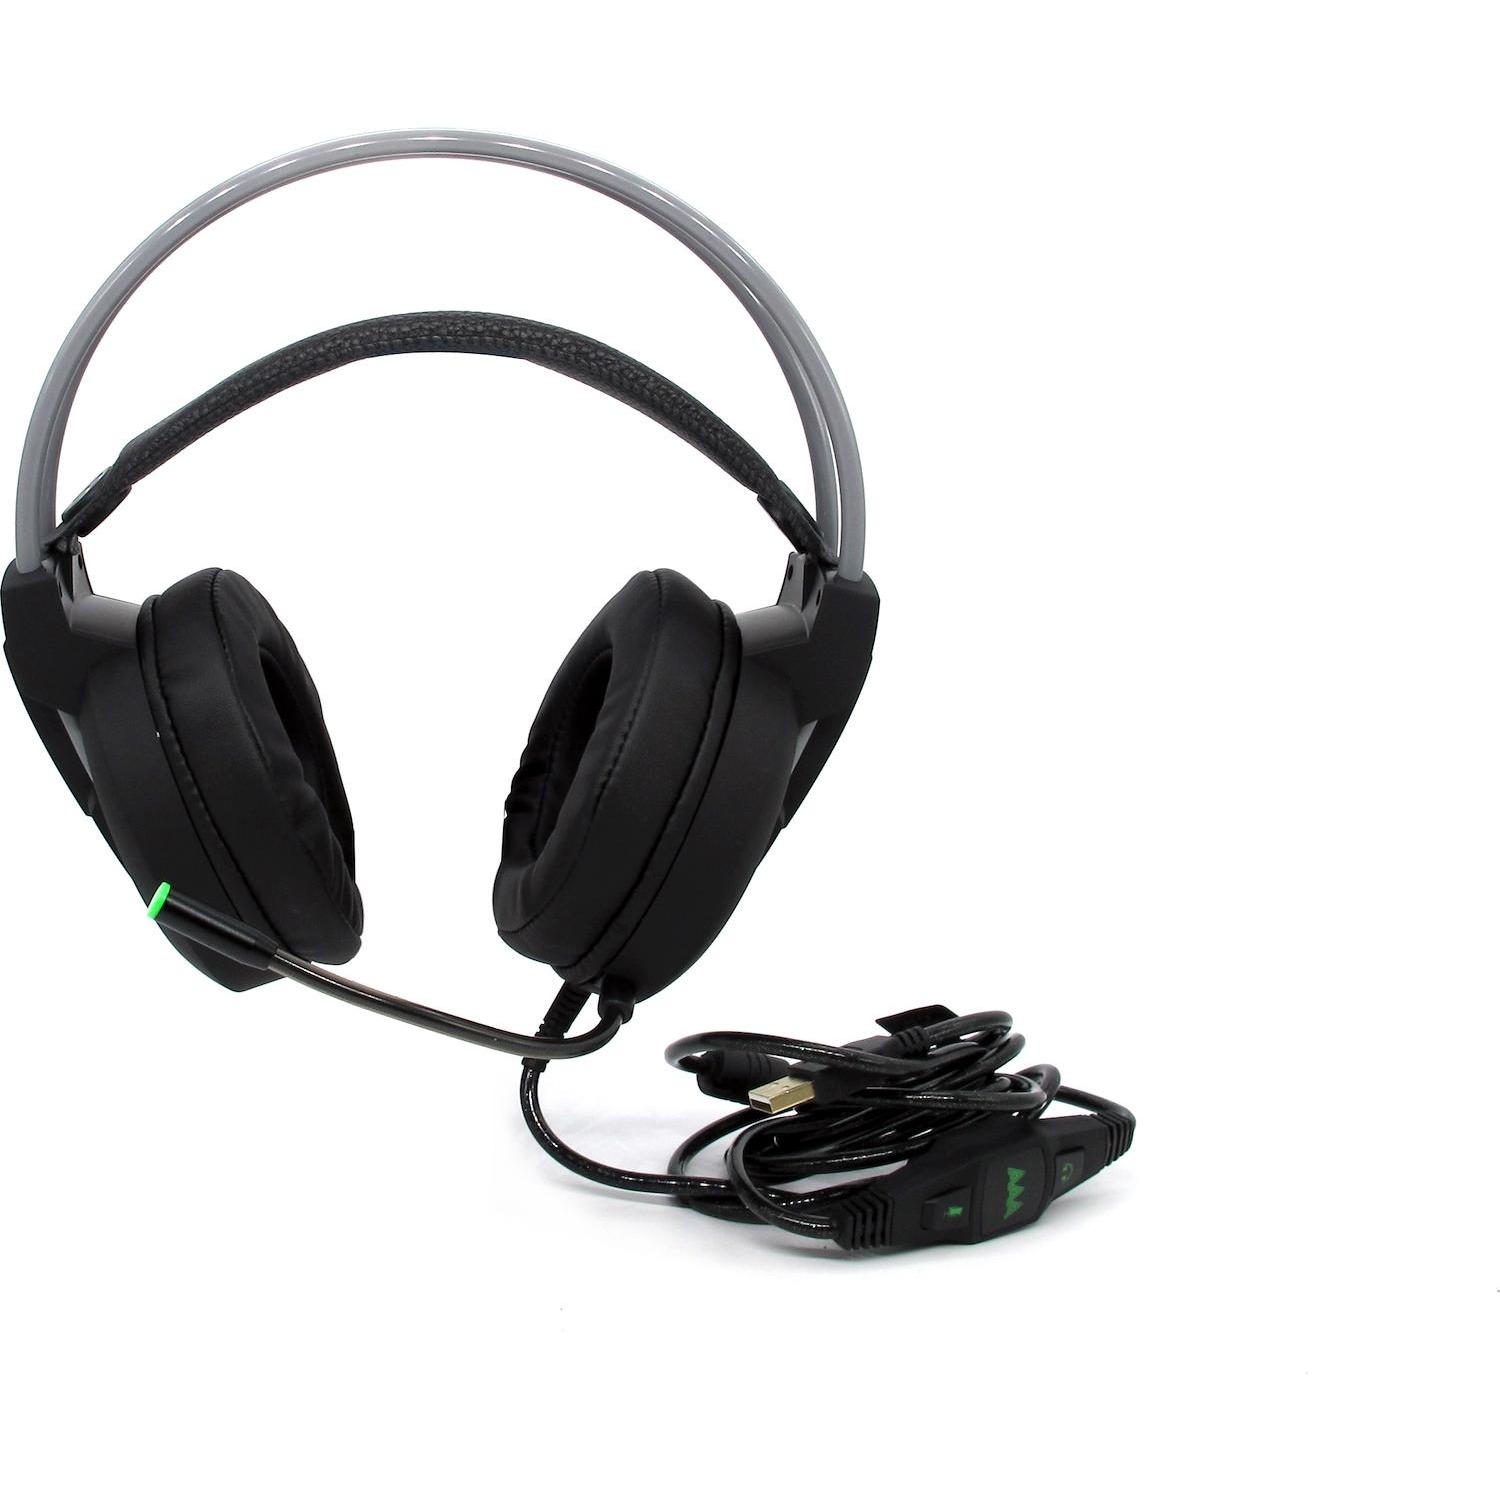 https://images.dimostore.it/1500/cuffie-aaamaze-headset-gaming-a-filo-con-microfono-nere-amgt0009-cufaaaamgt0009.jpg